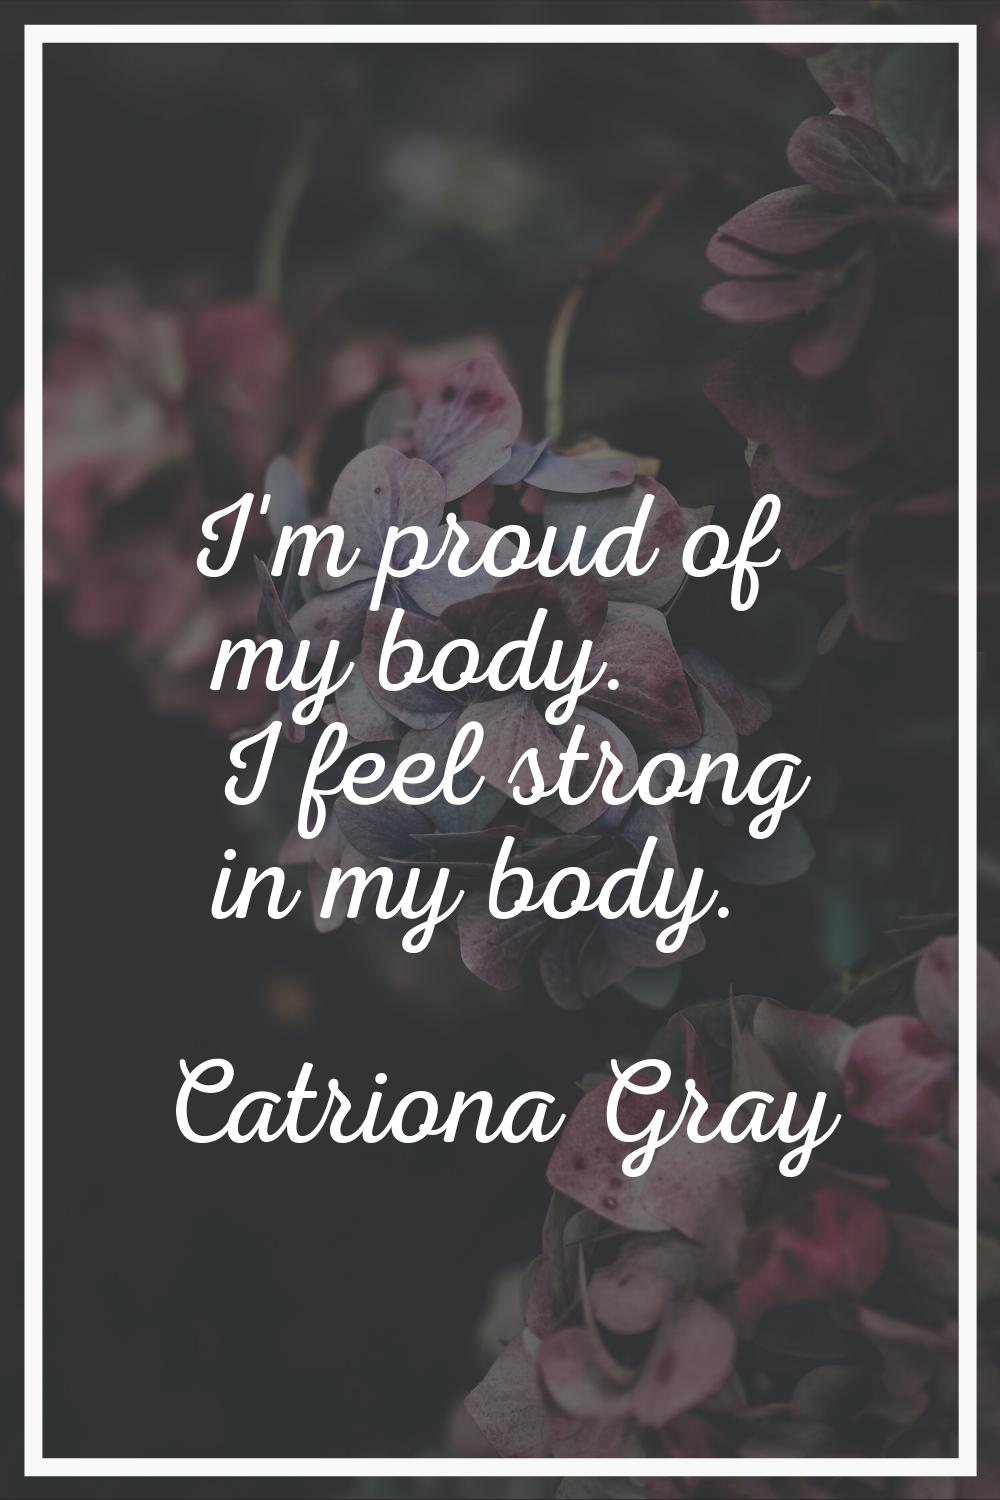 I'm proud of my body. I feel strong in my body.